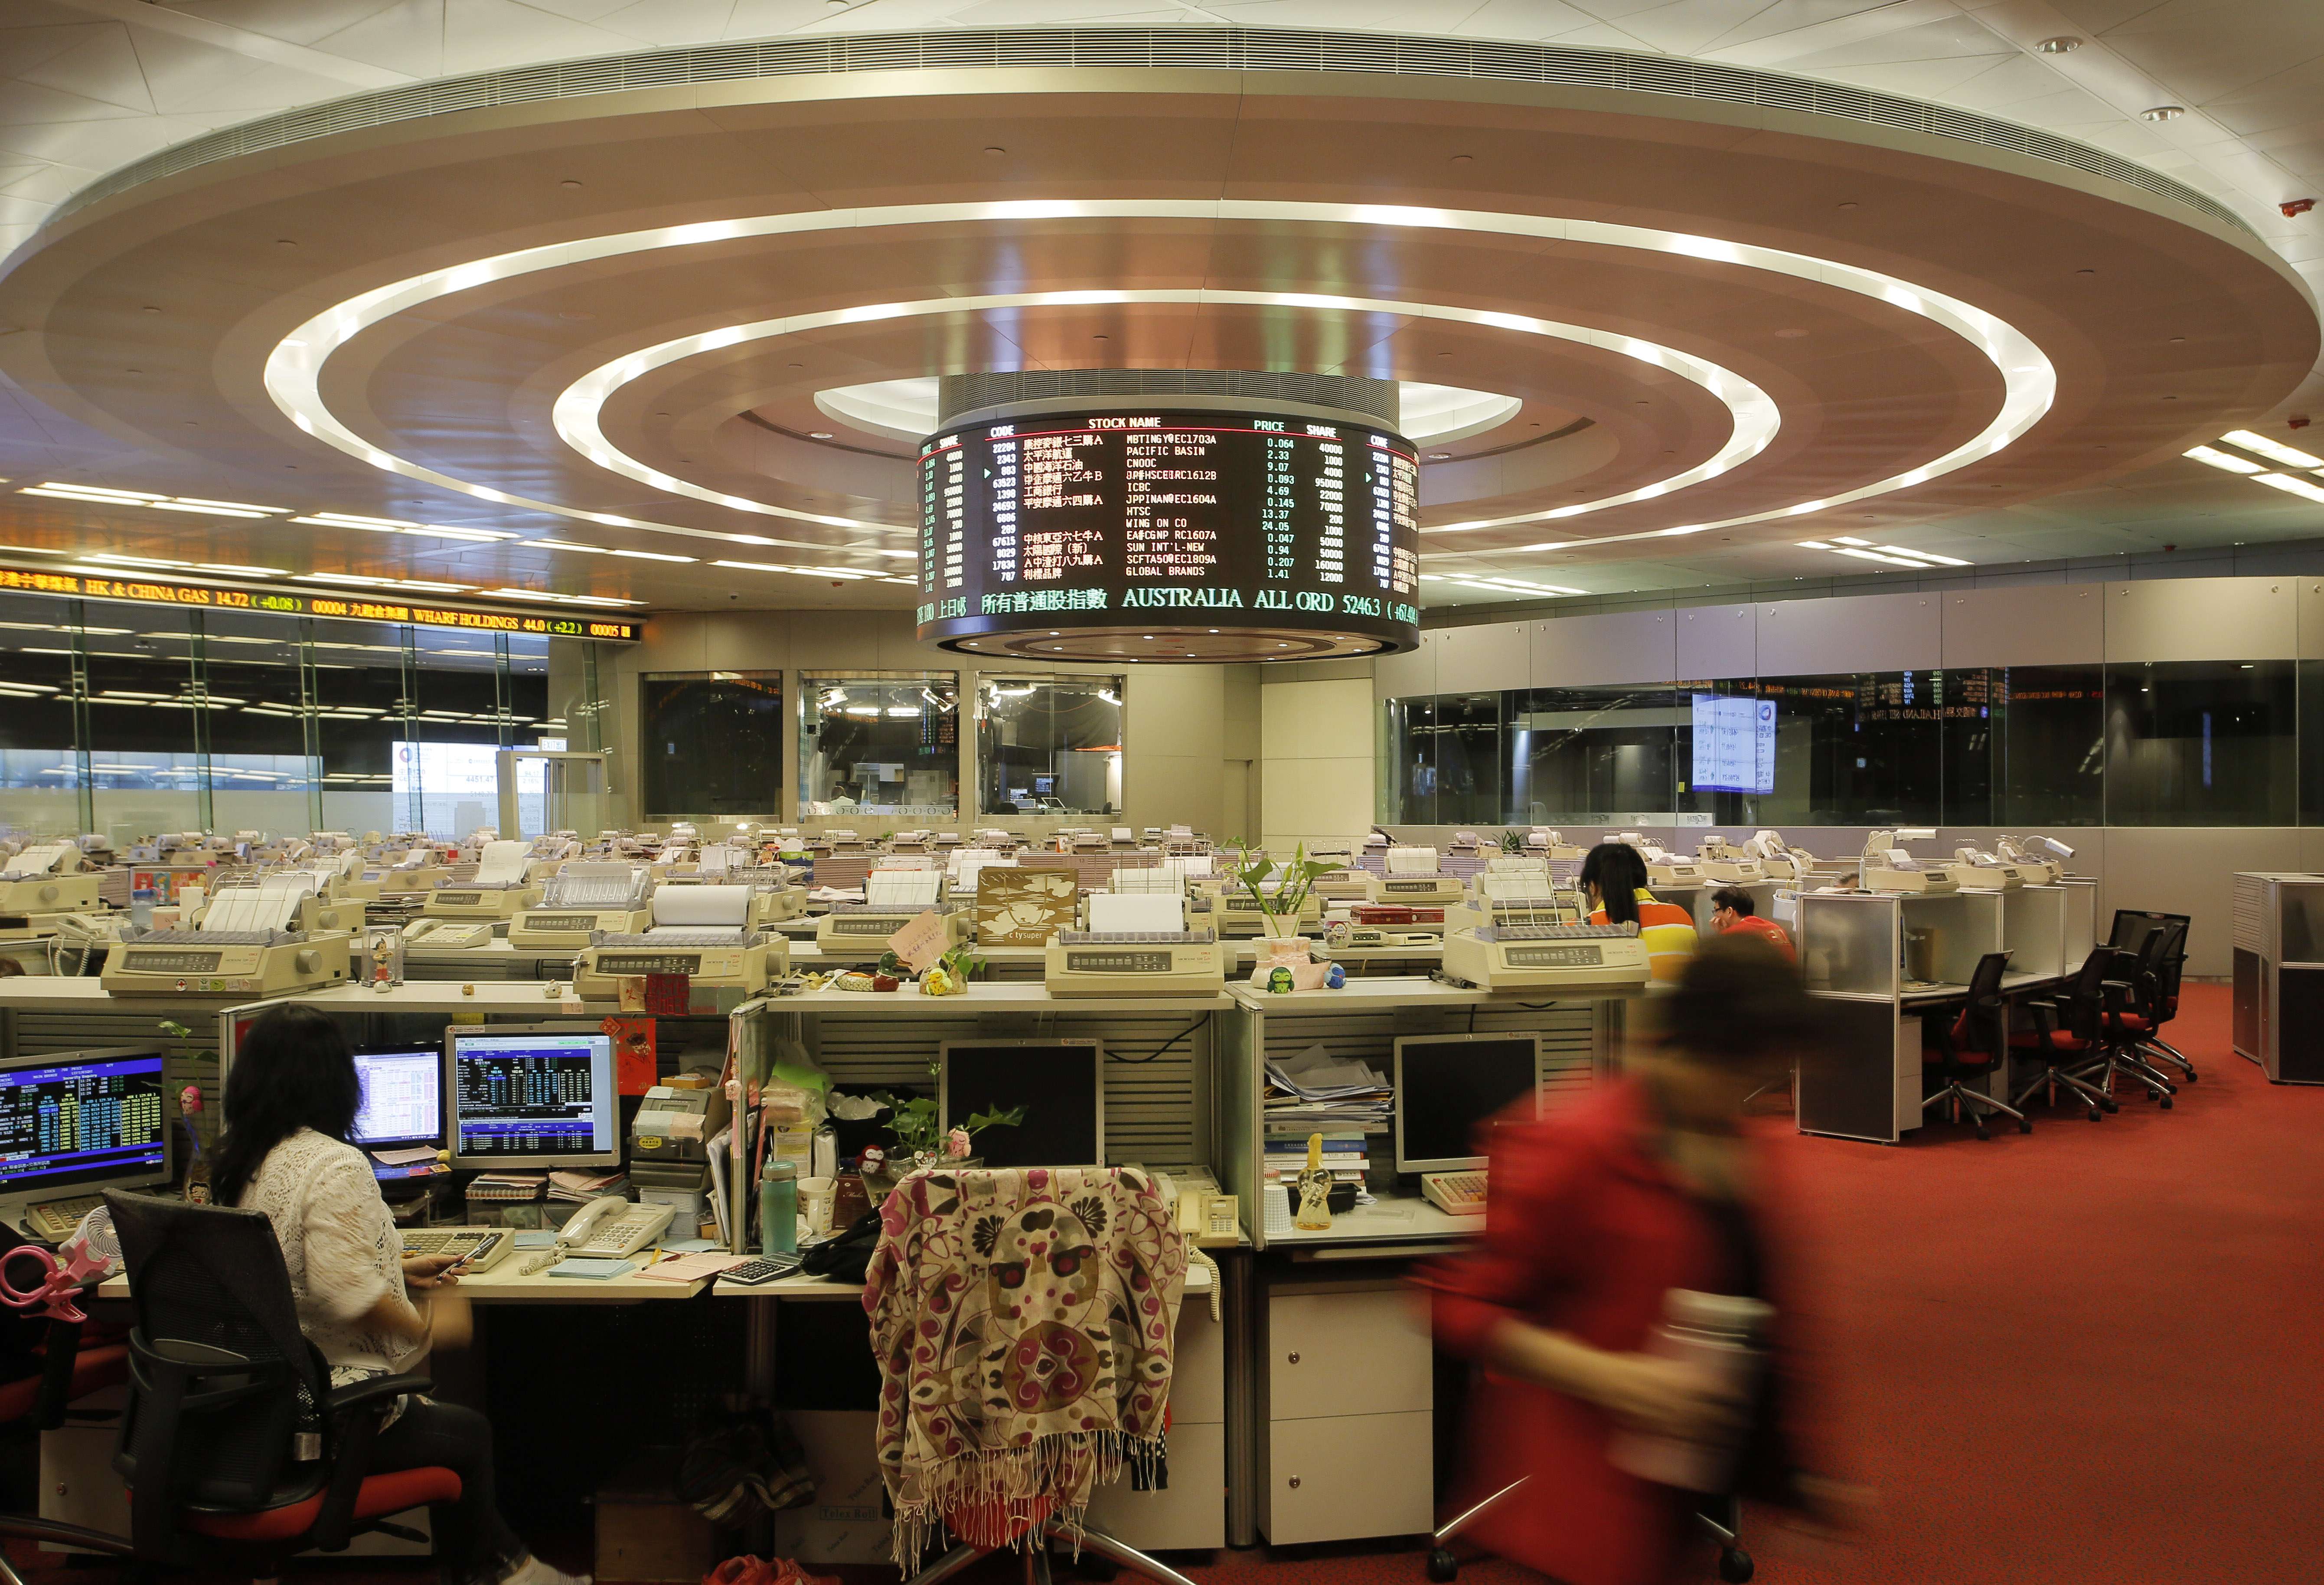 The Hong Kong stock exchange was the largest IPO market worldwide last year and from 2009 to 2011. Photo: AP